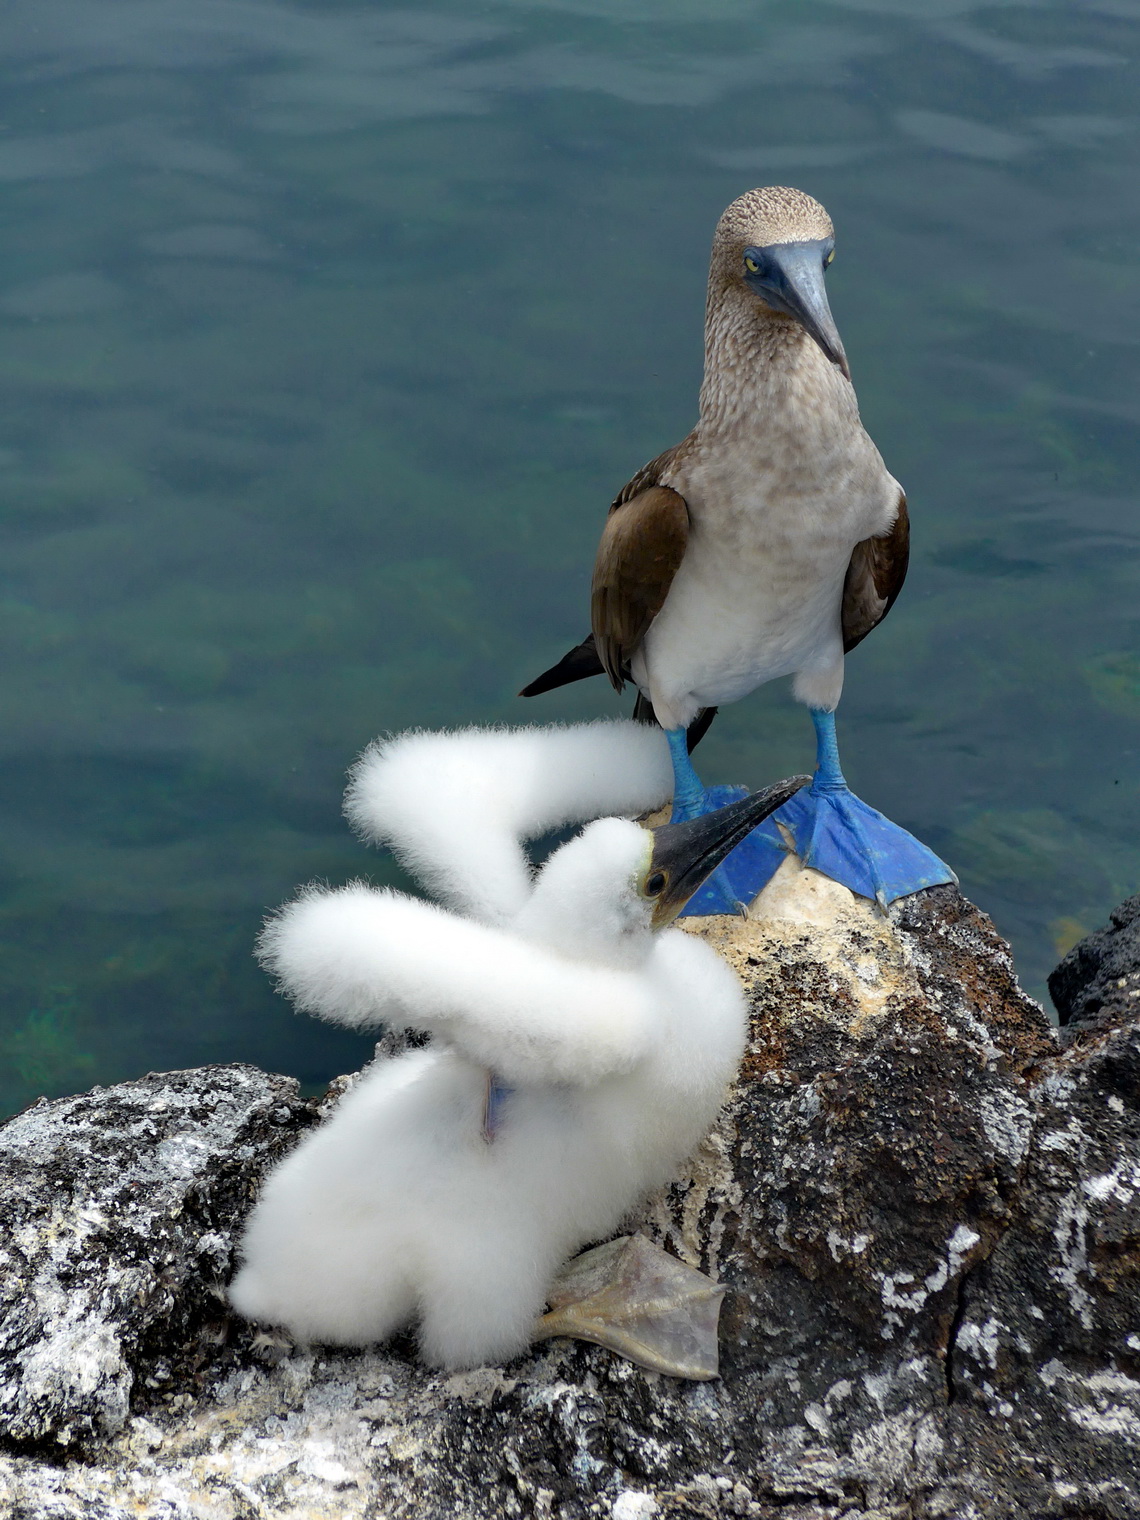 Blue-footed booby baby with its mother